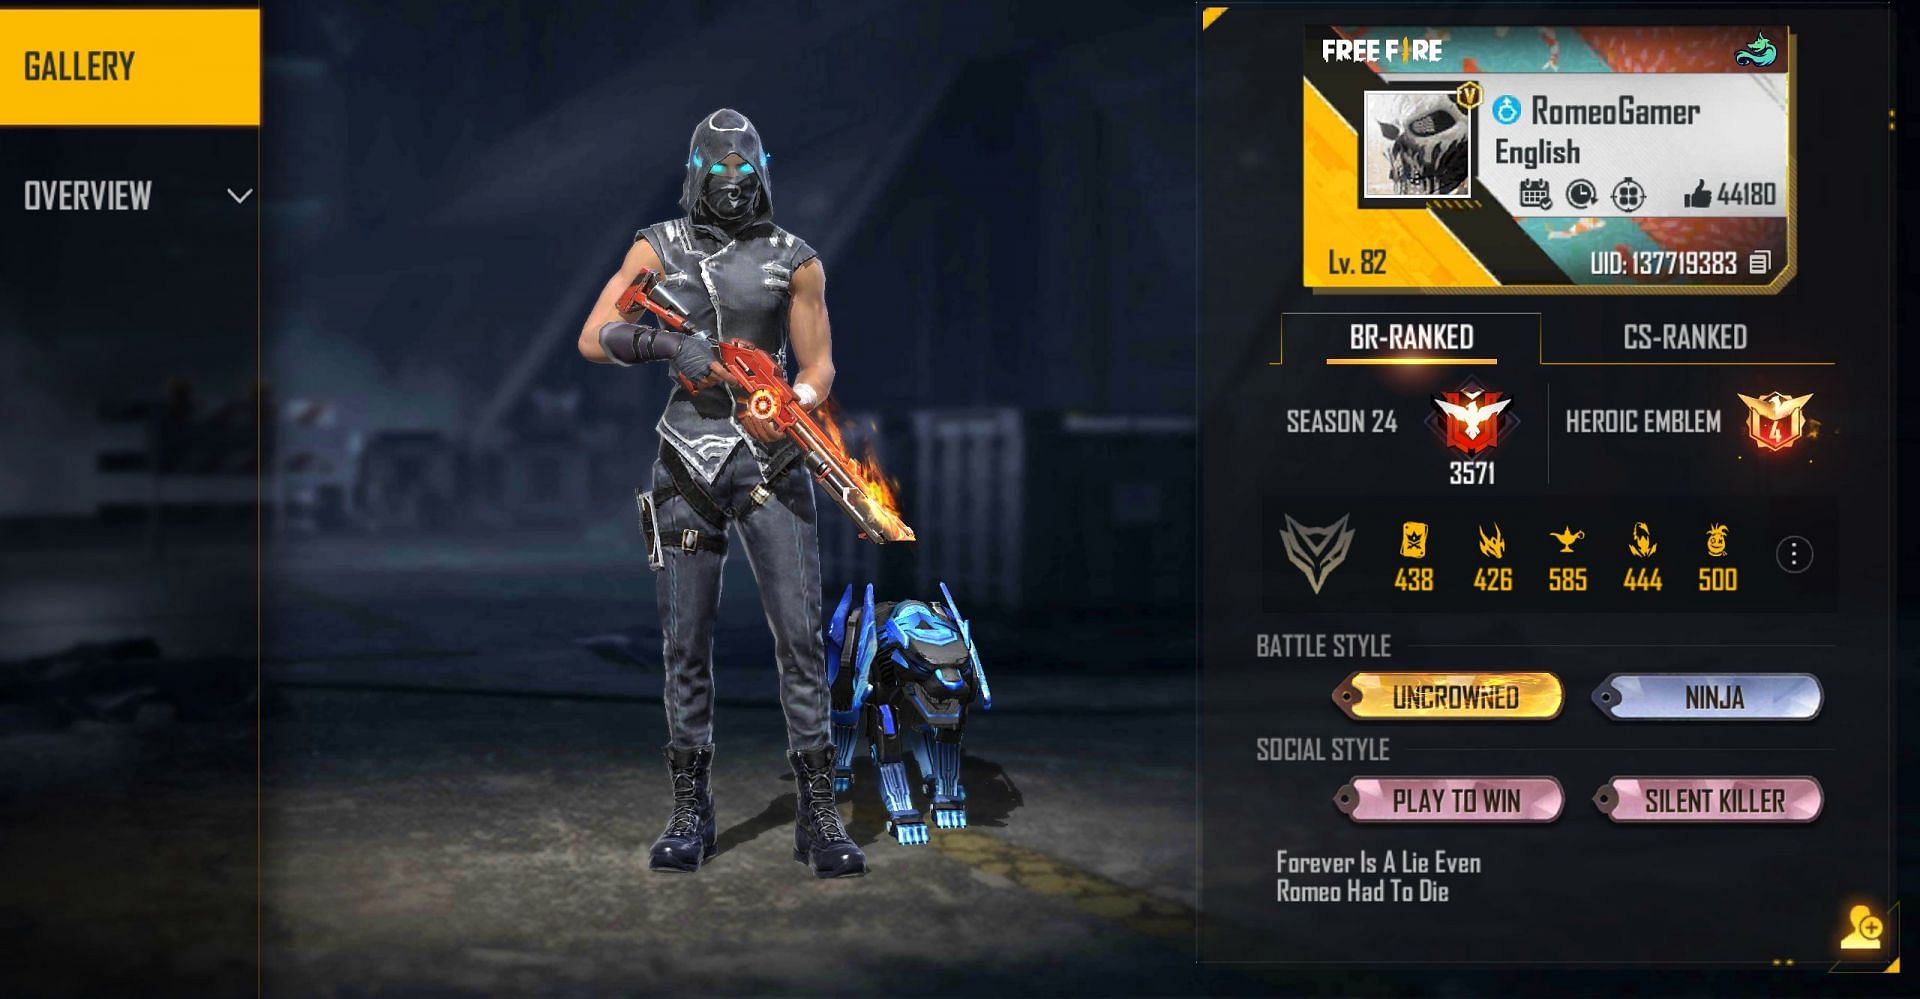 Romeo Gamer&rsquo;s real name is Yuvraj (Image via Free Fire)